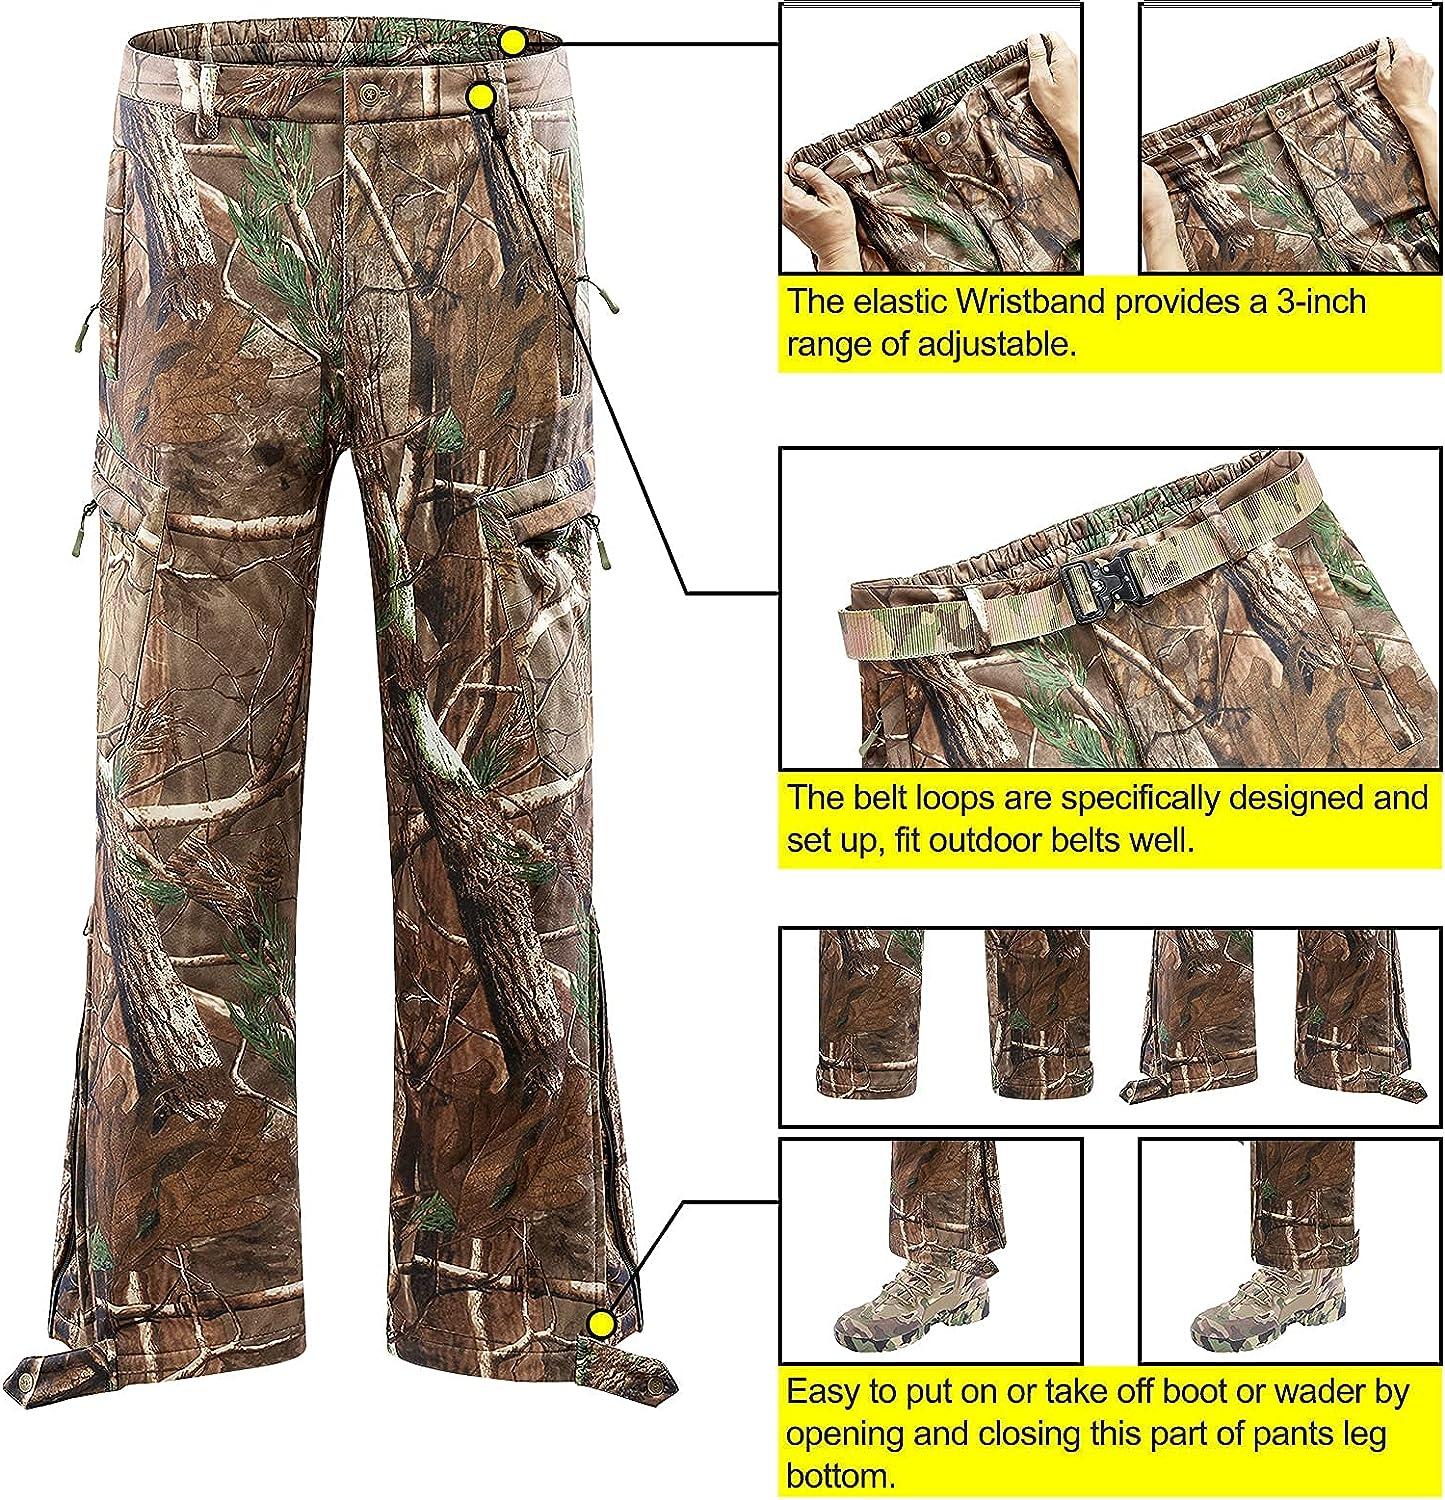 NEW VIEW Silent Camo Hunting Clothes for Men, Fleece-Lined Hunting Jacket  and Pants, Warm and Water Resistant